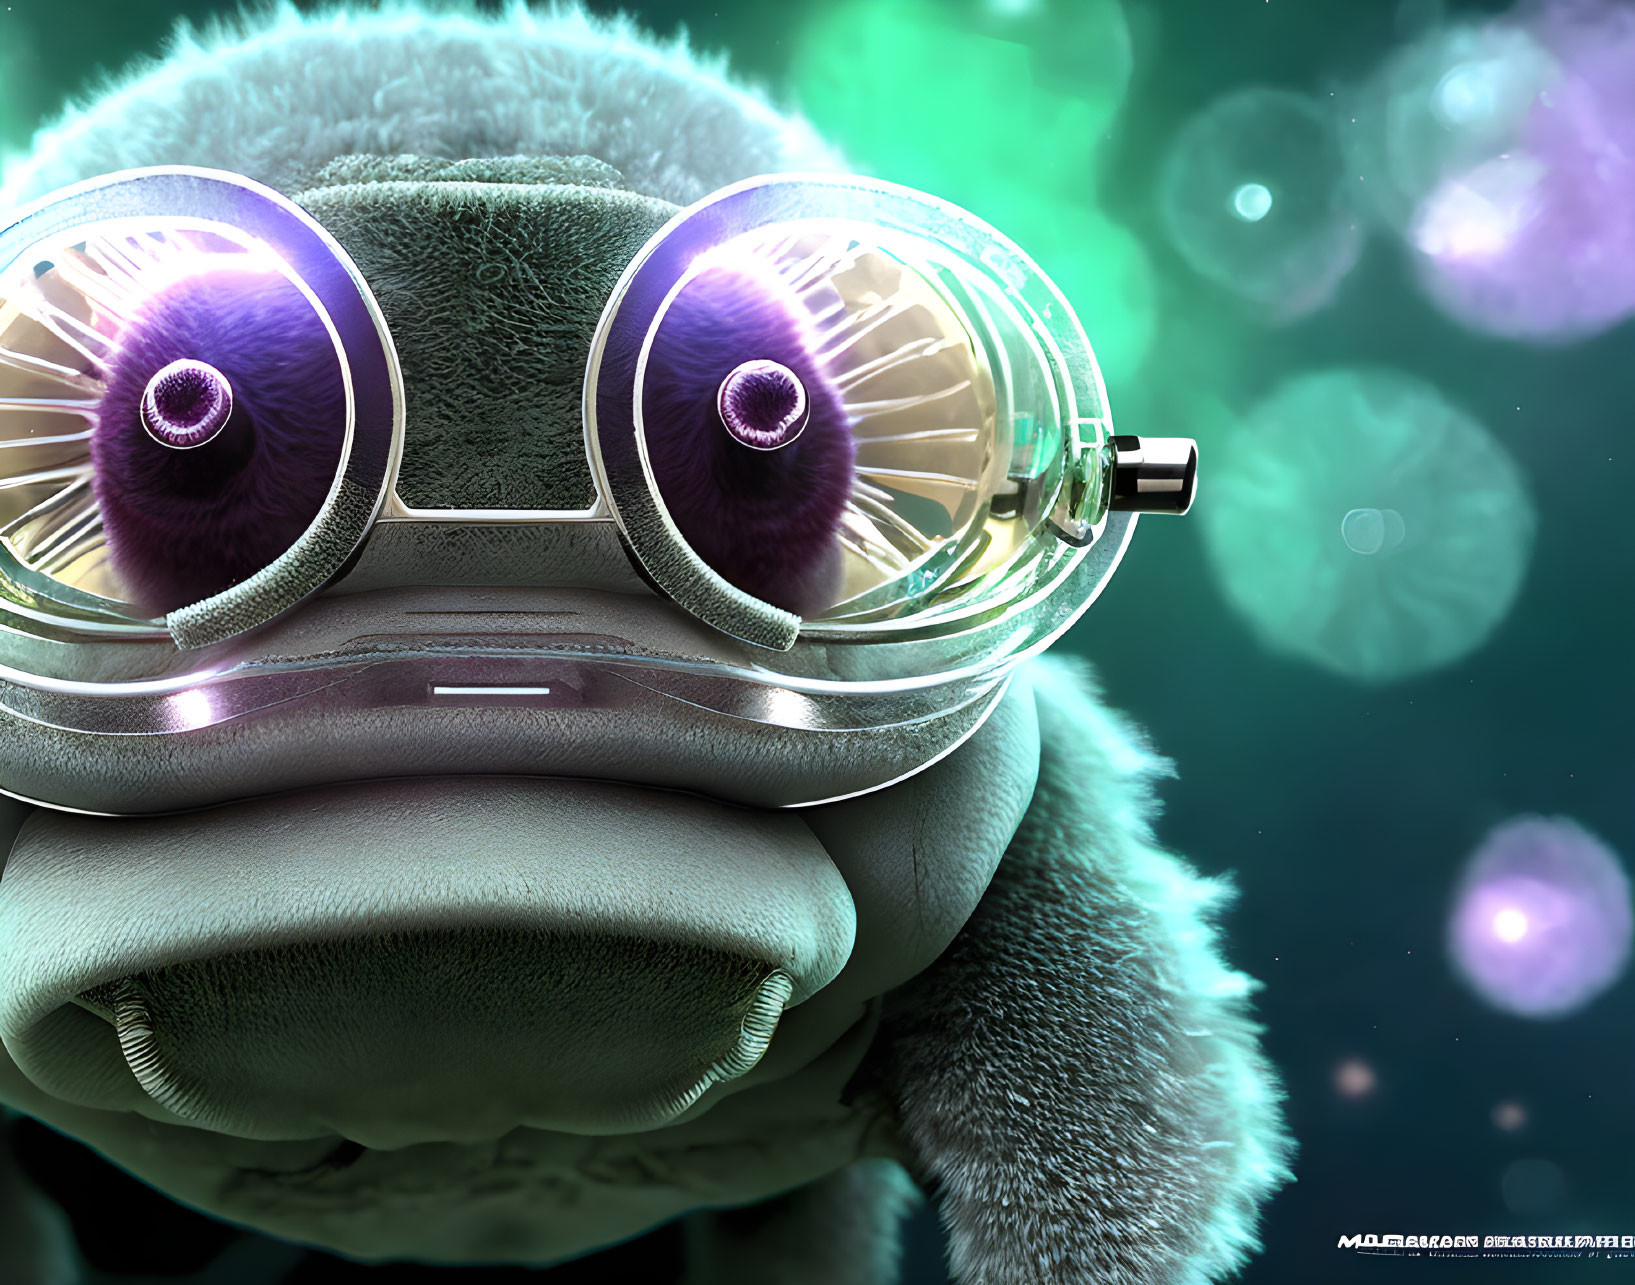 Stylized anthropomorphic fish with purple eyes and glasses